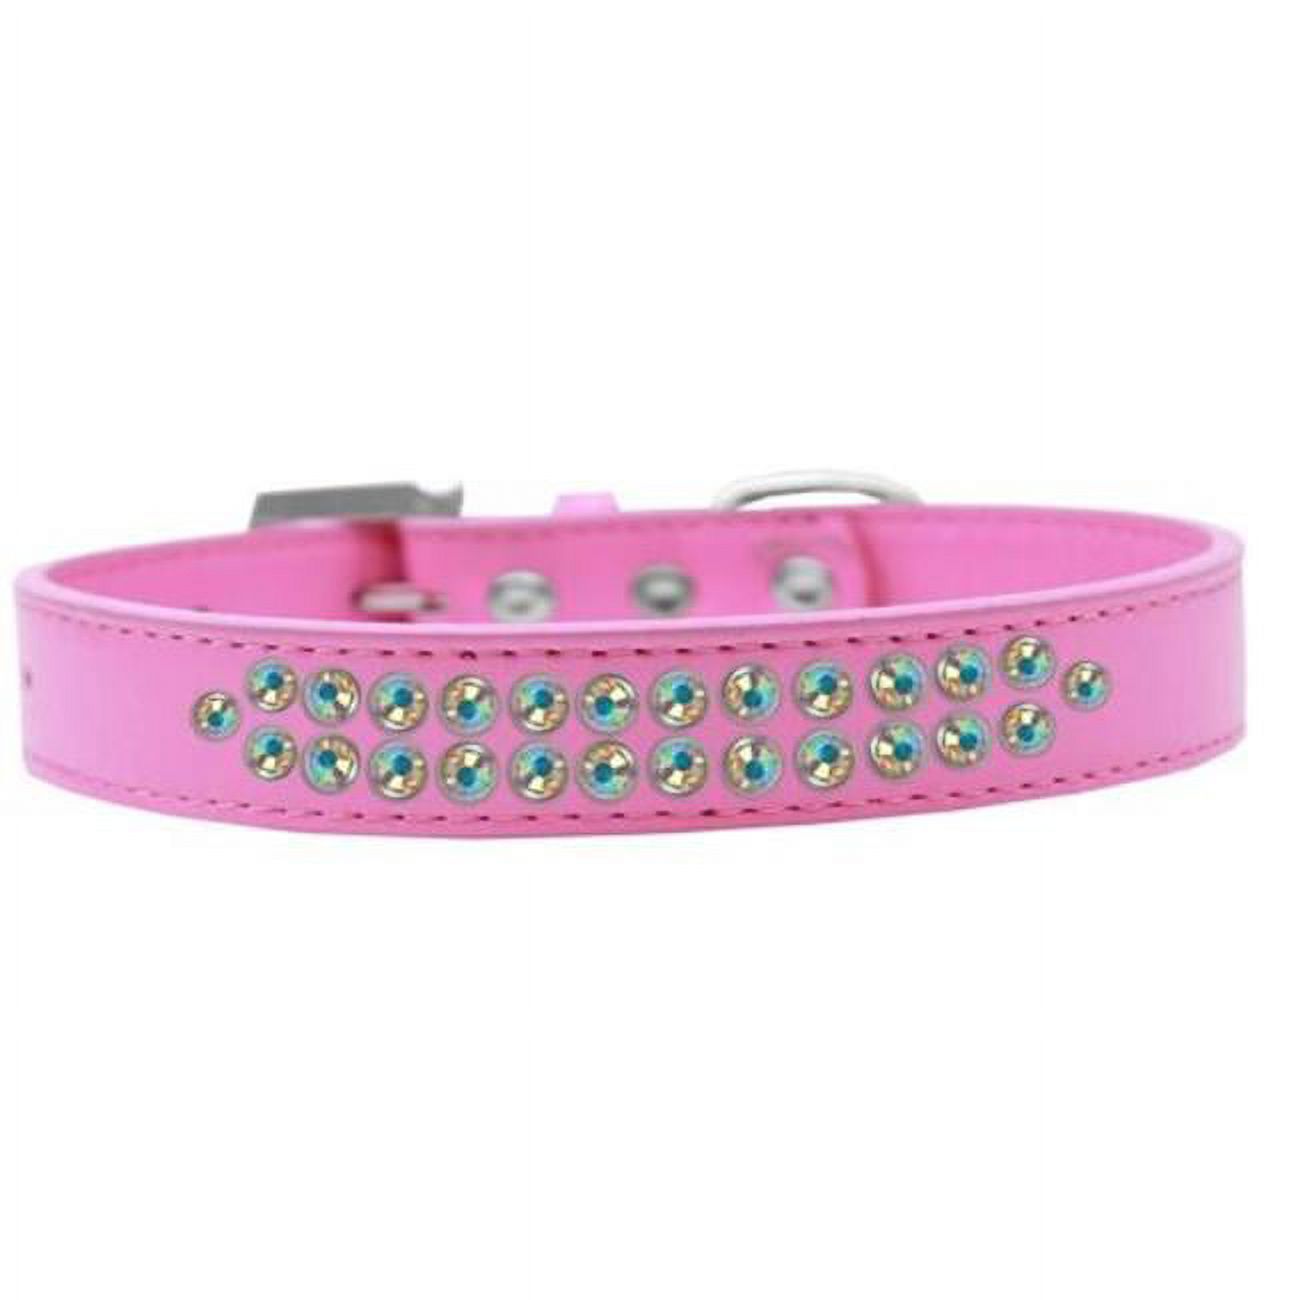 Mirage Pet Products613-02 BPK-20 Two Row AB Crystal Dog Collar, Bright Pink - Size 20 - image 1 of 5